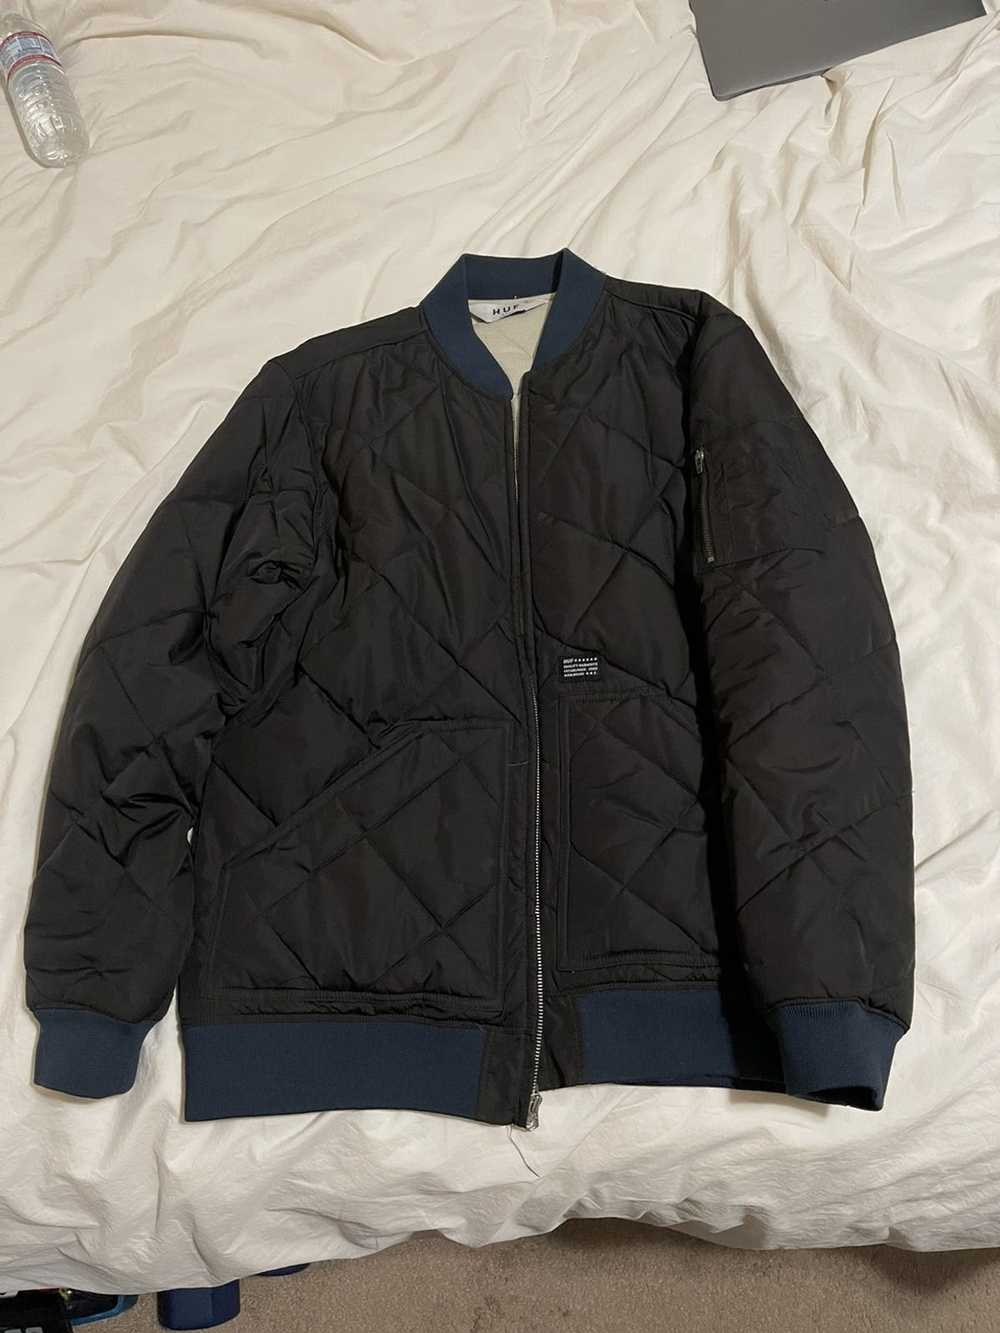 Huf Huf Quilted Bomber Jacket - image 1